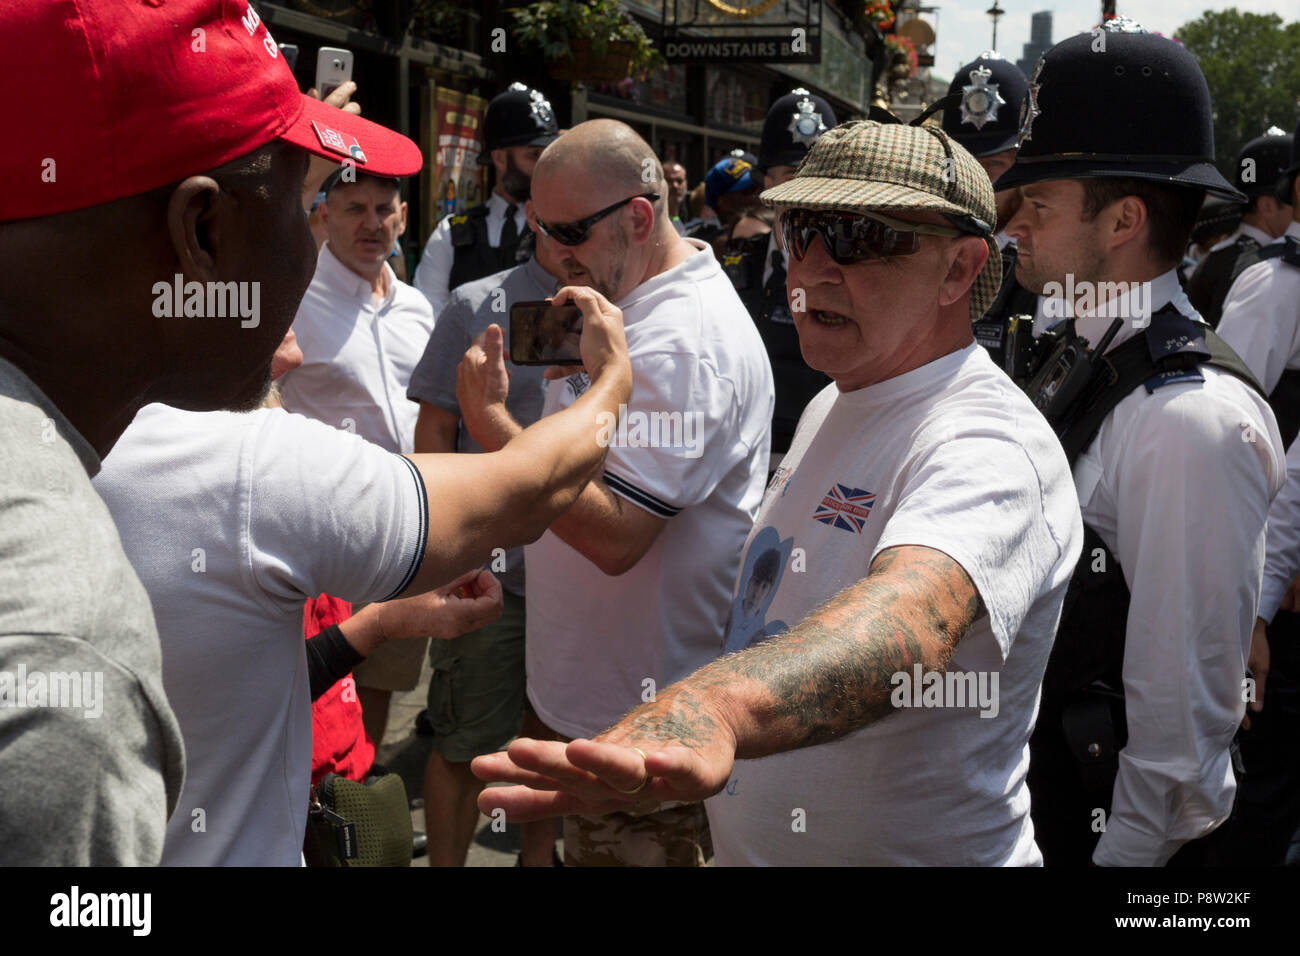 London, UK: Members of the far-right supporters of jailed English Defence Force (EDF) leader Tommy Robinson make a counter-demonstration to those against the visit of US President Donald Trump to the UK, march through central London, on 13th July 2018, in London, England. Photo by Richard Baker / Alamy Live News Stock Photo